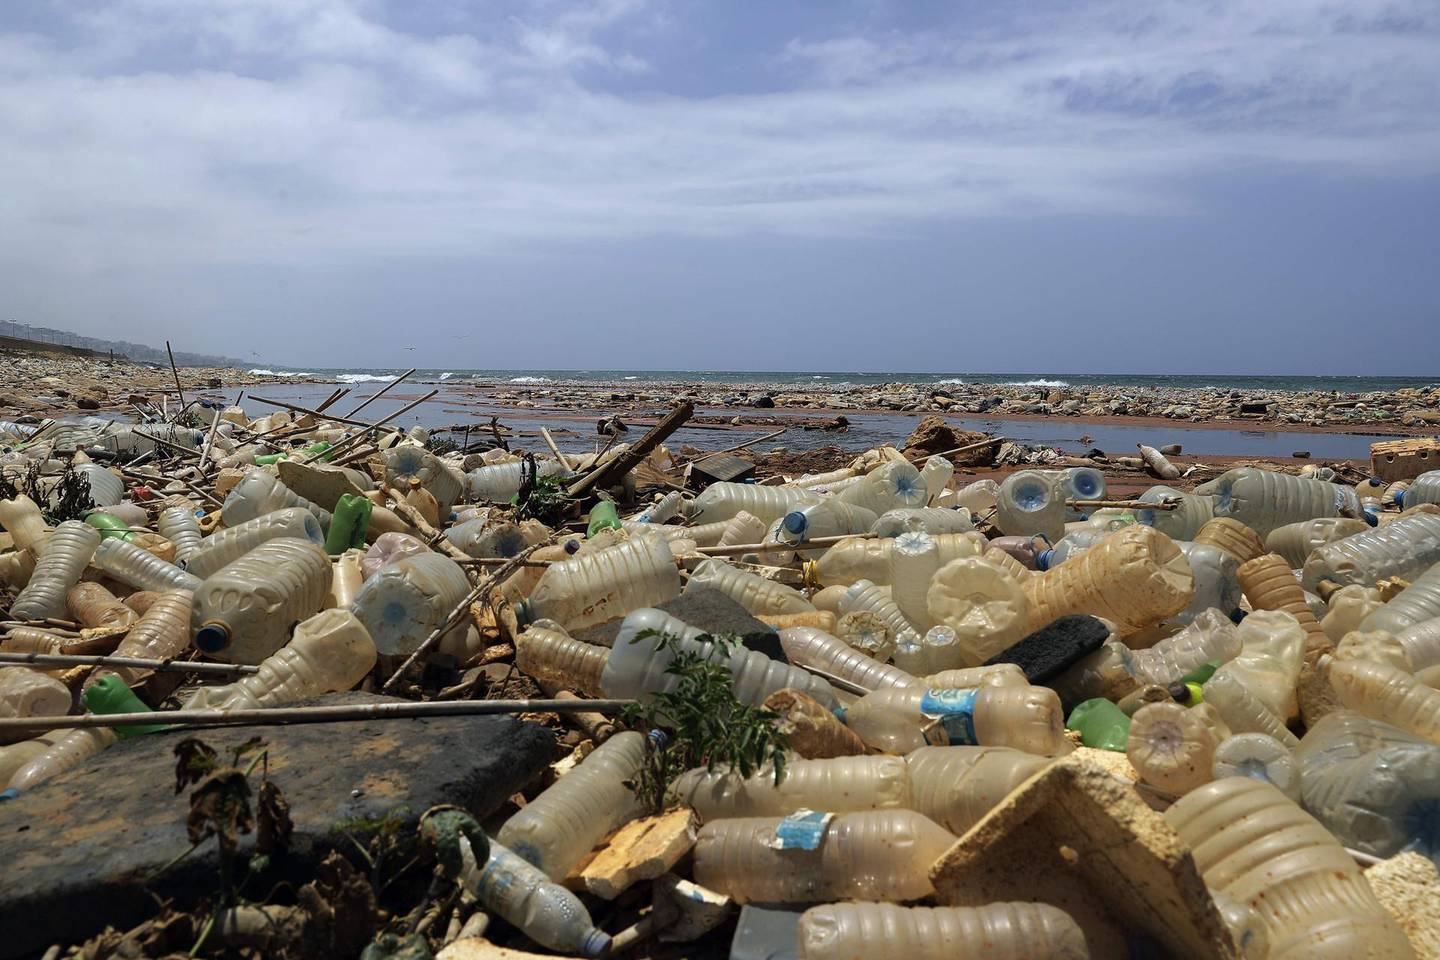 This picture shows a sewage discharge area next to piles of plastic bottles and gallons washed away by the water on the seaside of Ouzai, south of Beirut on July 19, 2018. Many Lebanese nationals are refraining from heading to the beach this summer after reports about high levels of pollution along the country's Mediterranean coast, despite reassurances from government officials that the beaches remain safe.  / AFP / JOSEPH EID
